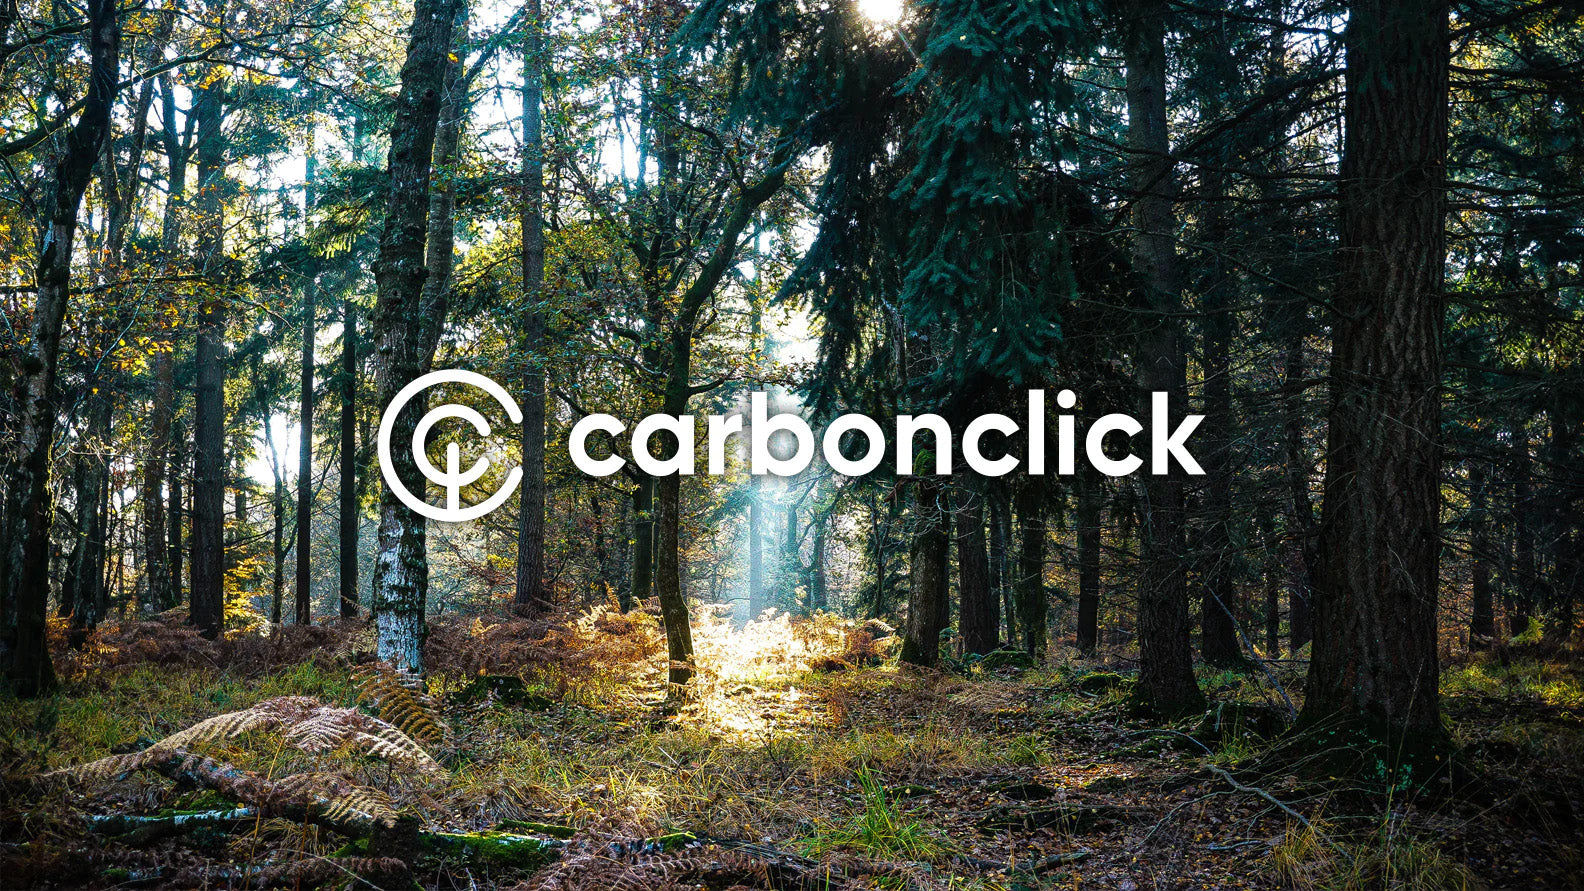 Carbon offset your New Forest purchase with CarbonClick